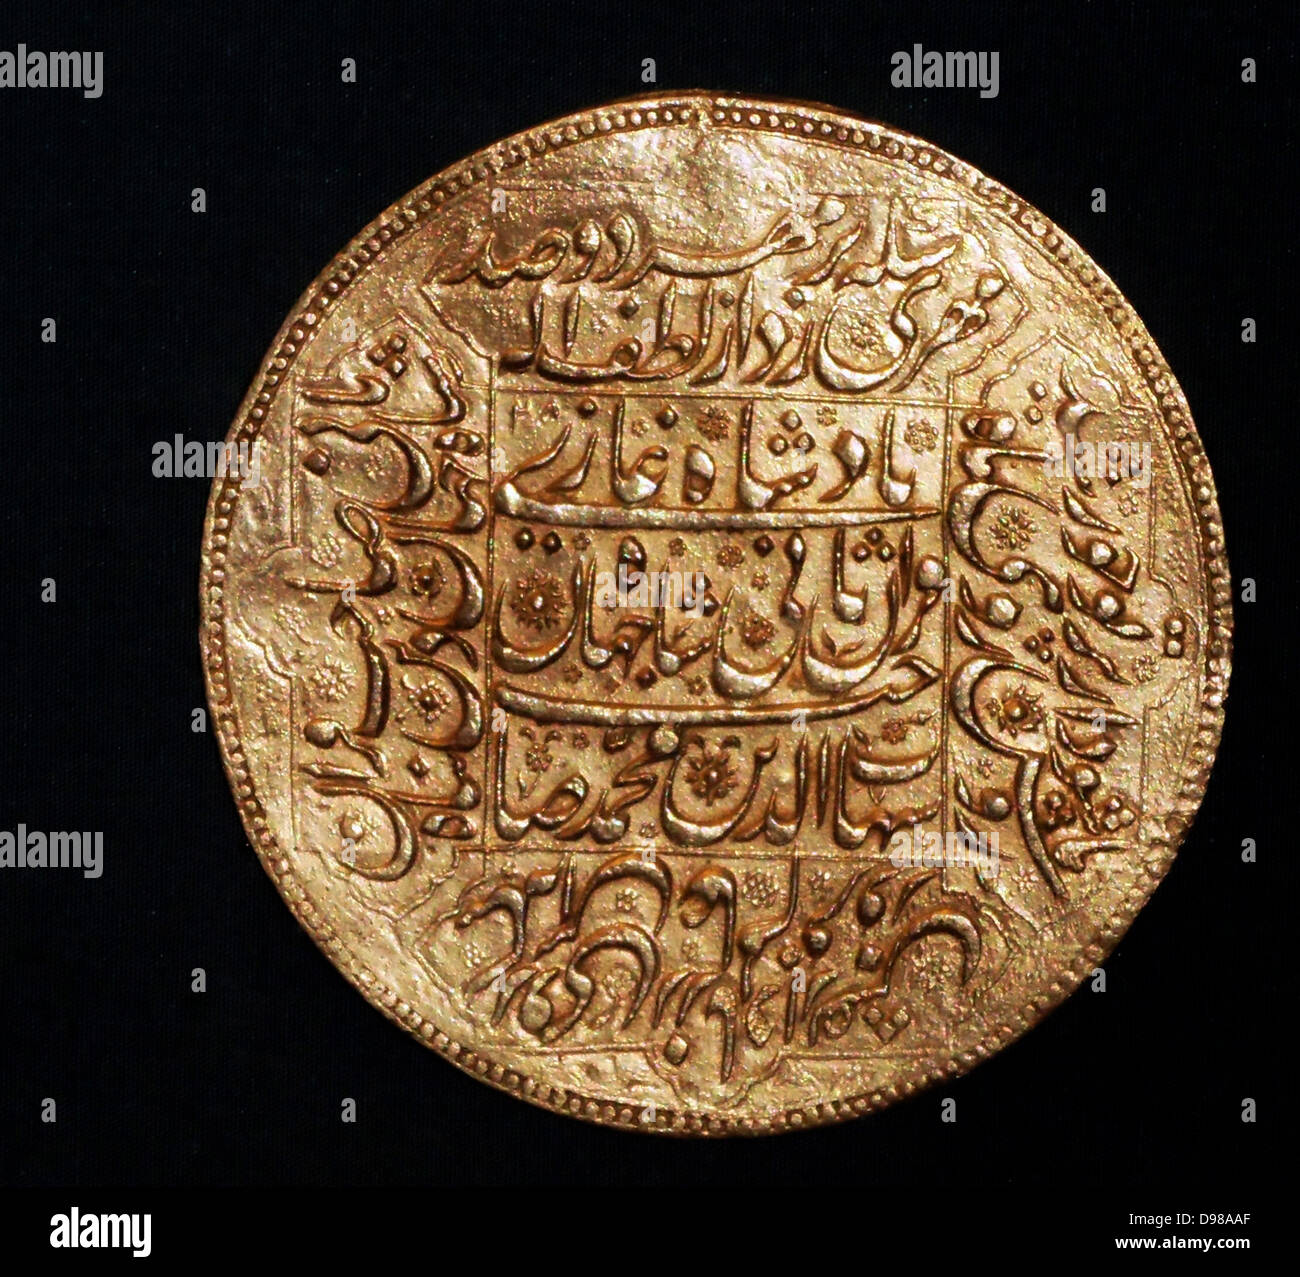 Facsimile of gold 200 mohur of Shah Jahan, Mughal emperor (1628-58).  The original was last seen in India in the 1840s. Stock Photo